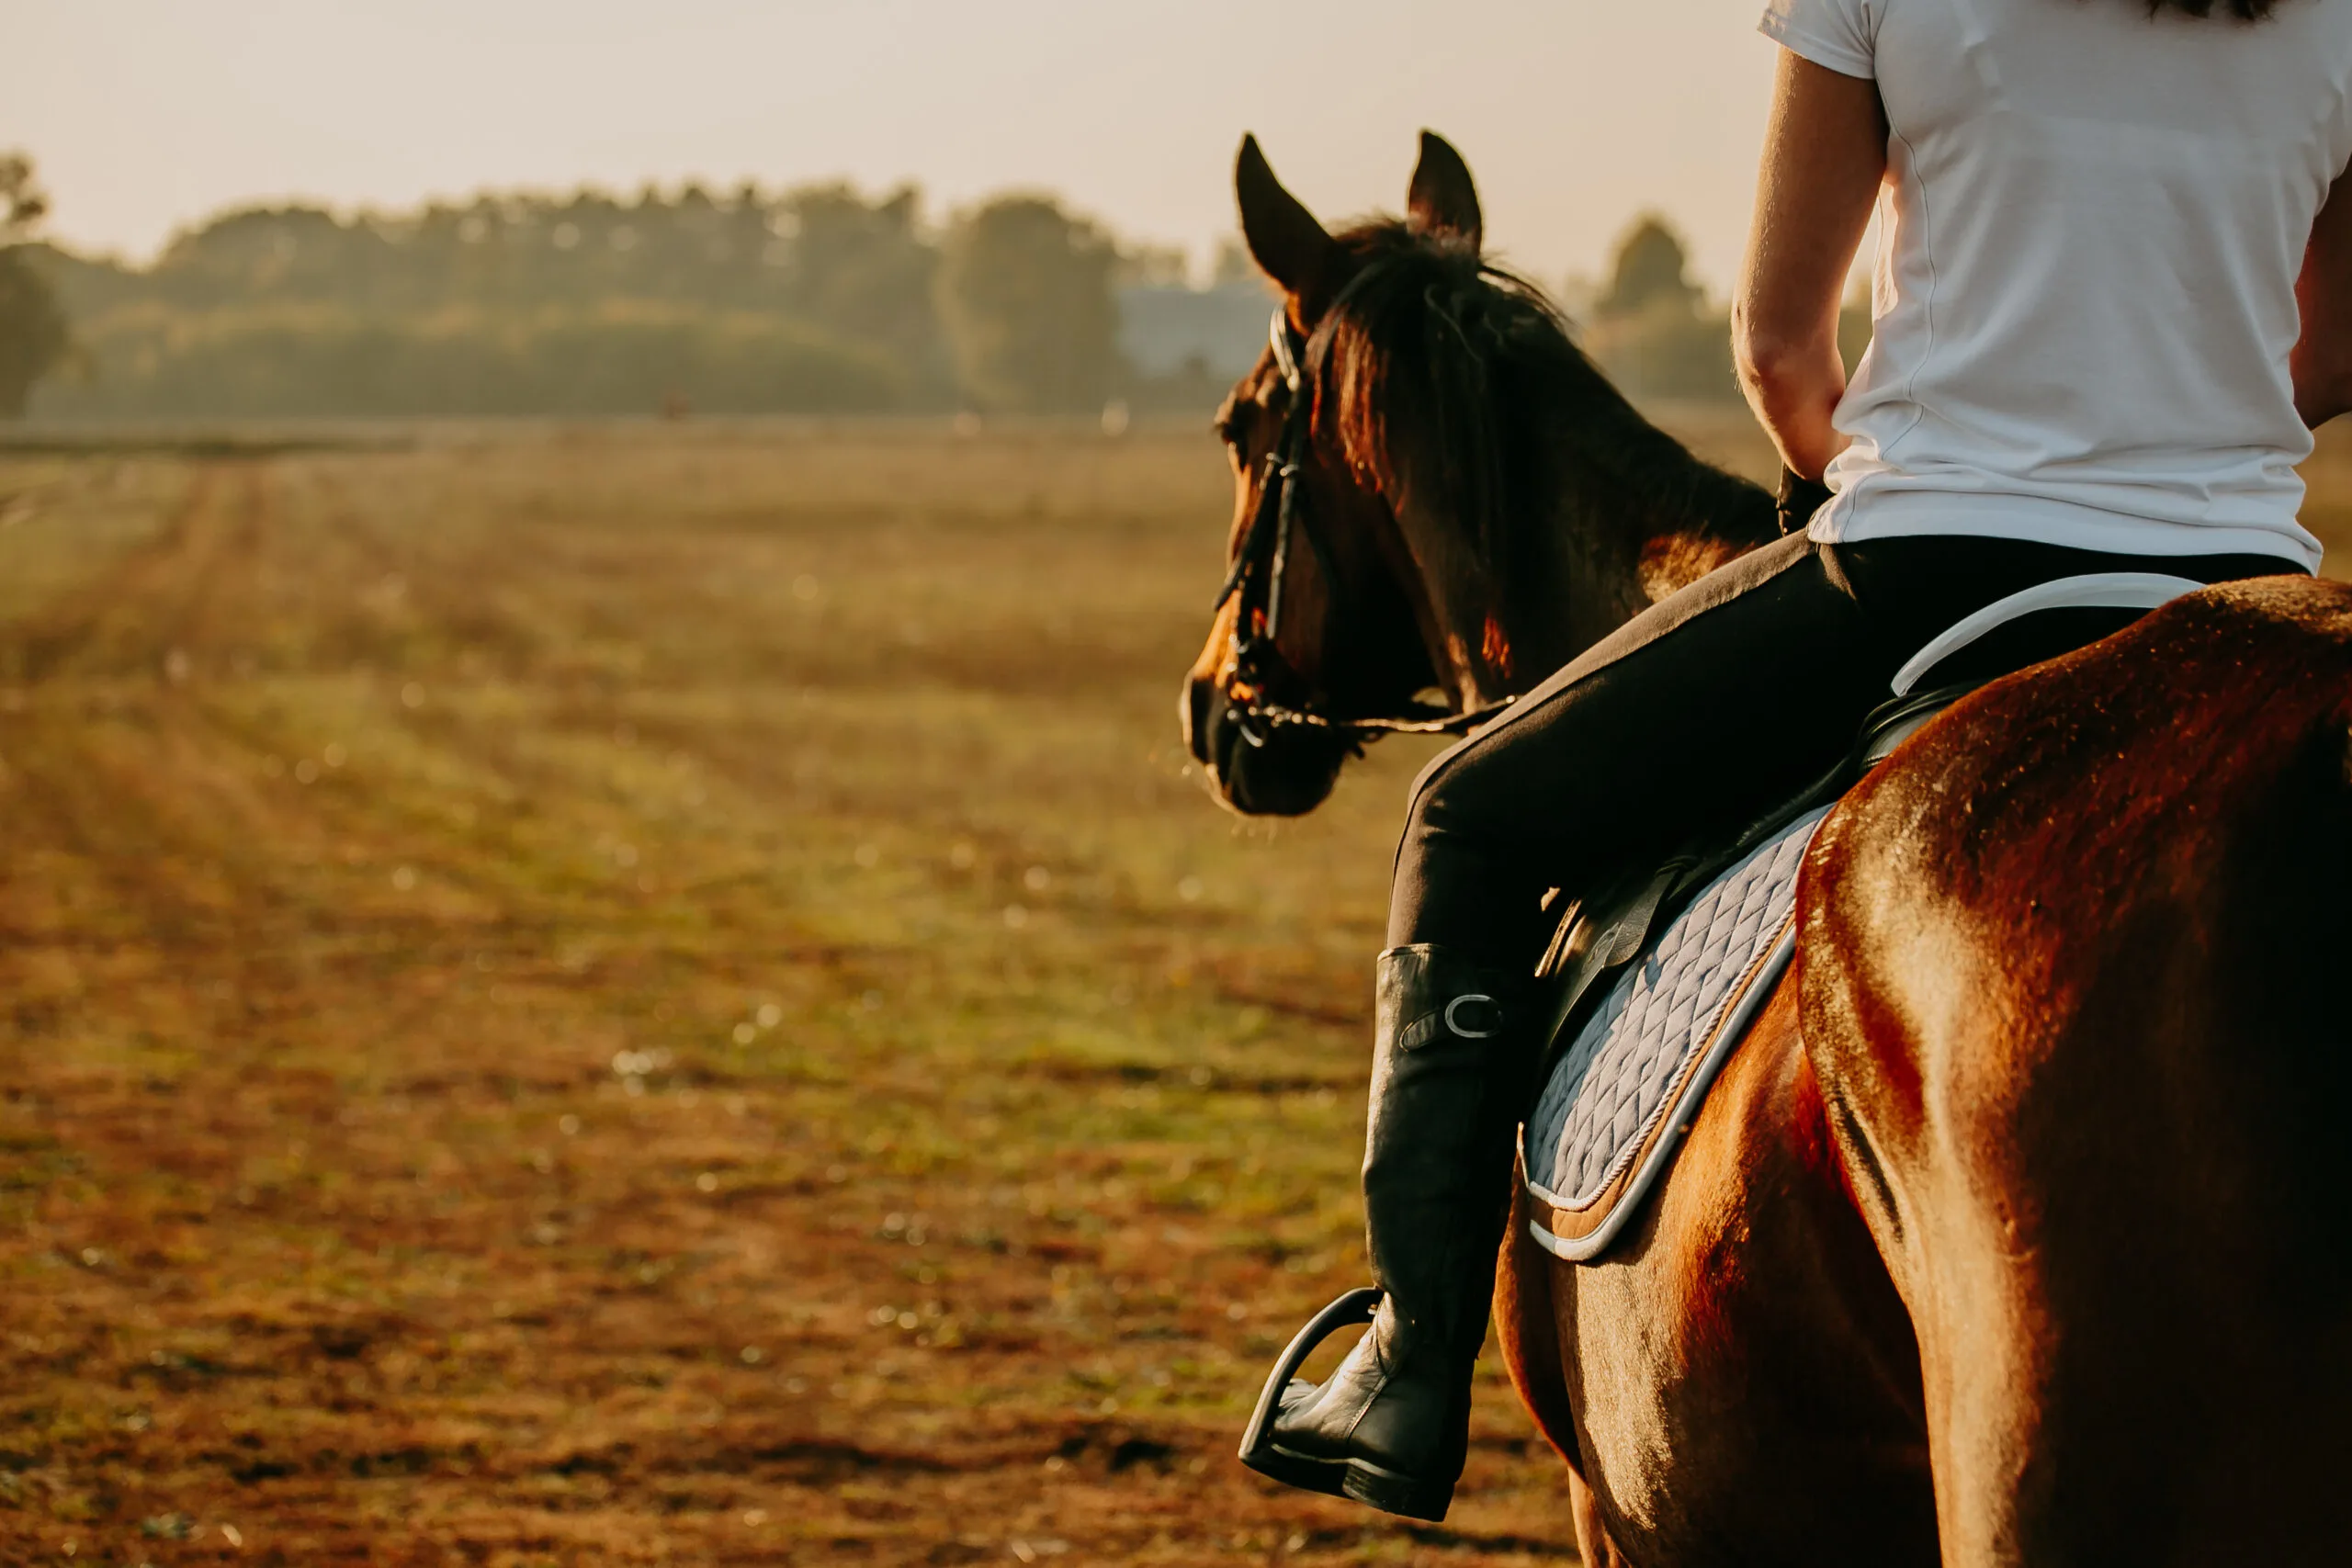 A girl riding a horse in an open field instead of a riding arena.